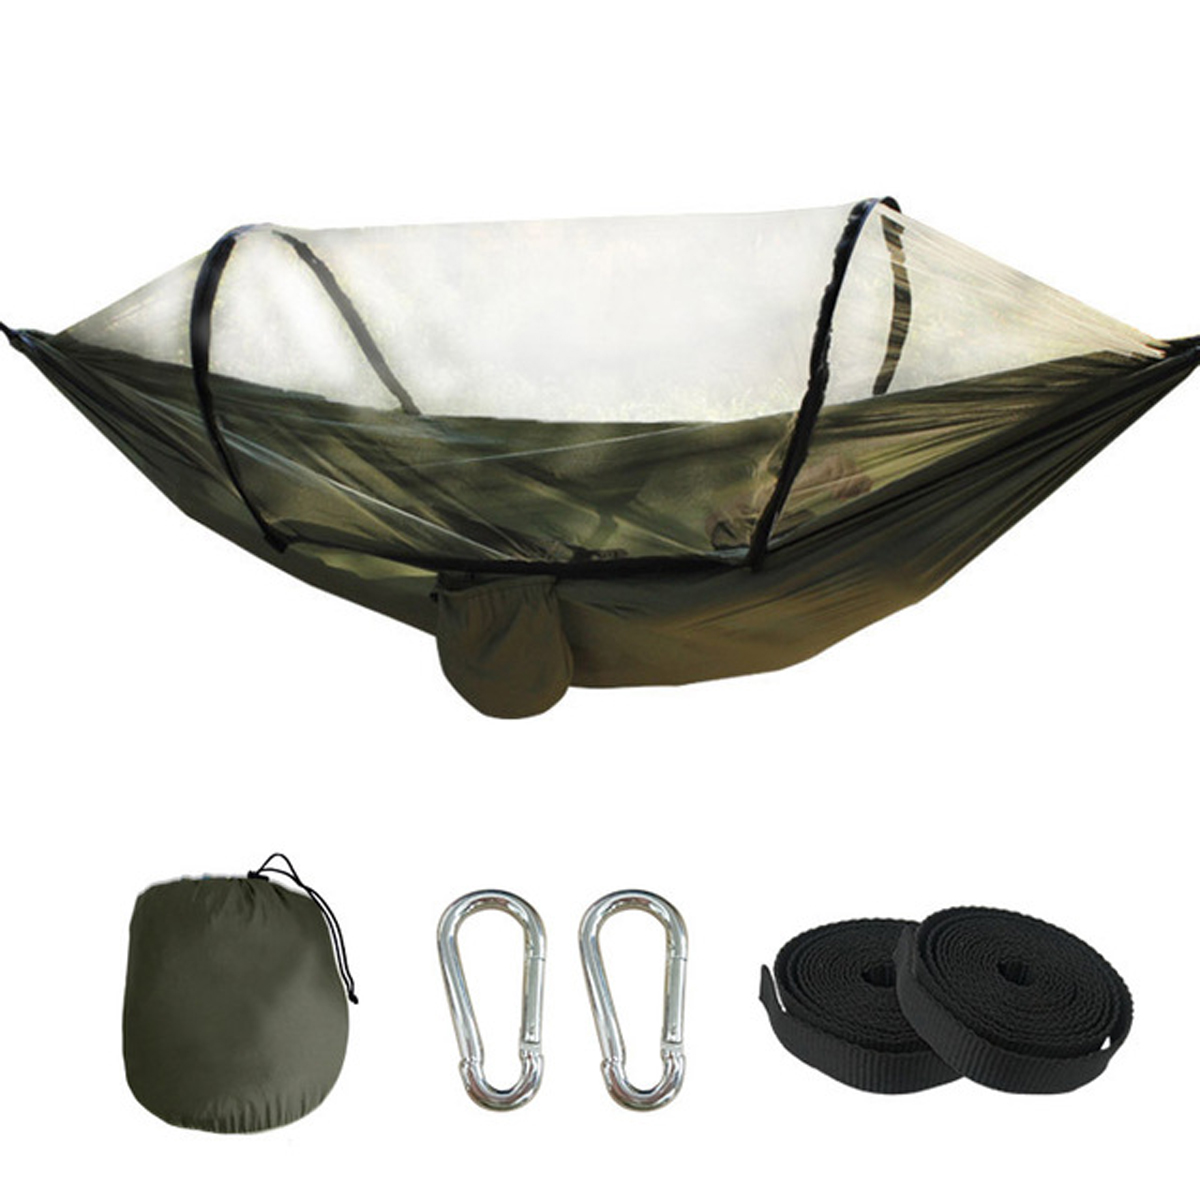 1-2-People-Camping-Hammock-with-Mosquito-Net-Lightweight-Hanging-Bed-Beach-Travel-Max-Load-300kg-1697049-9